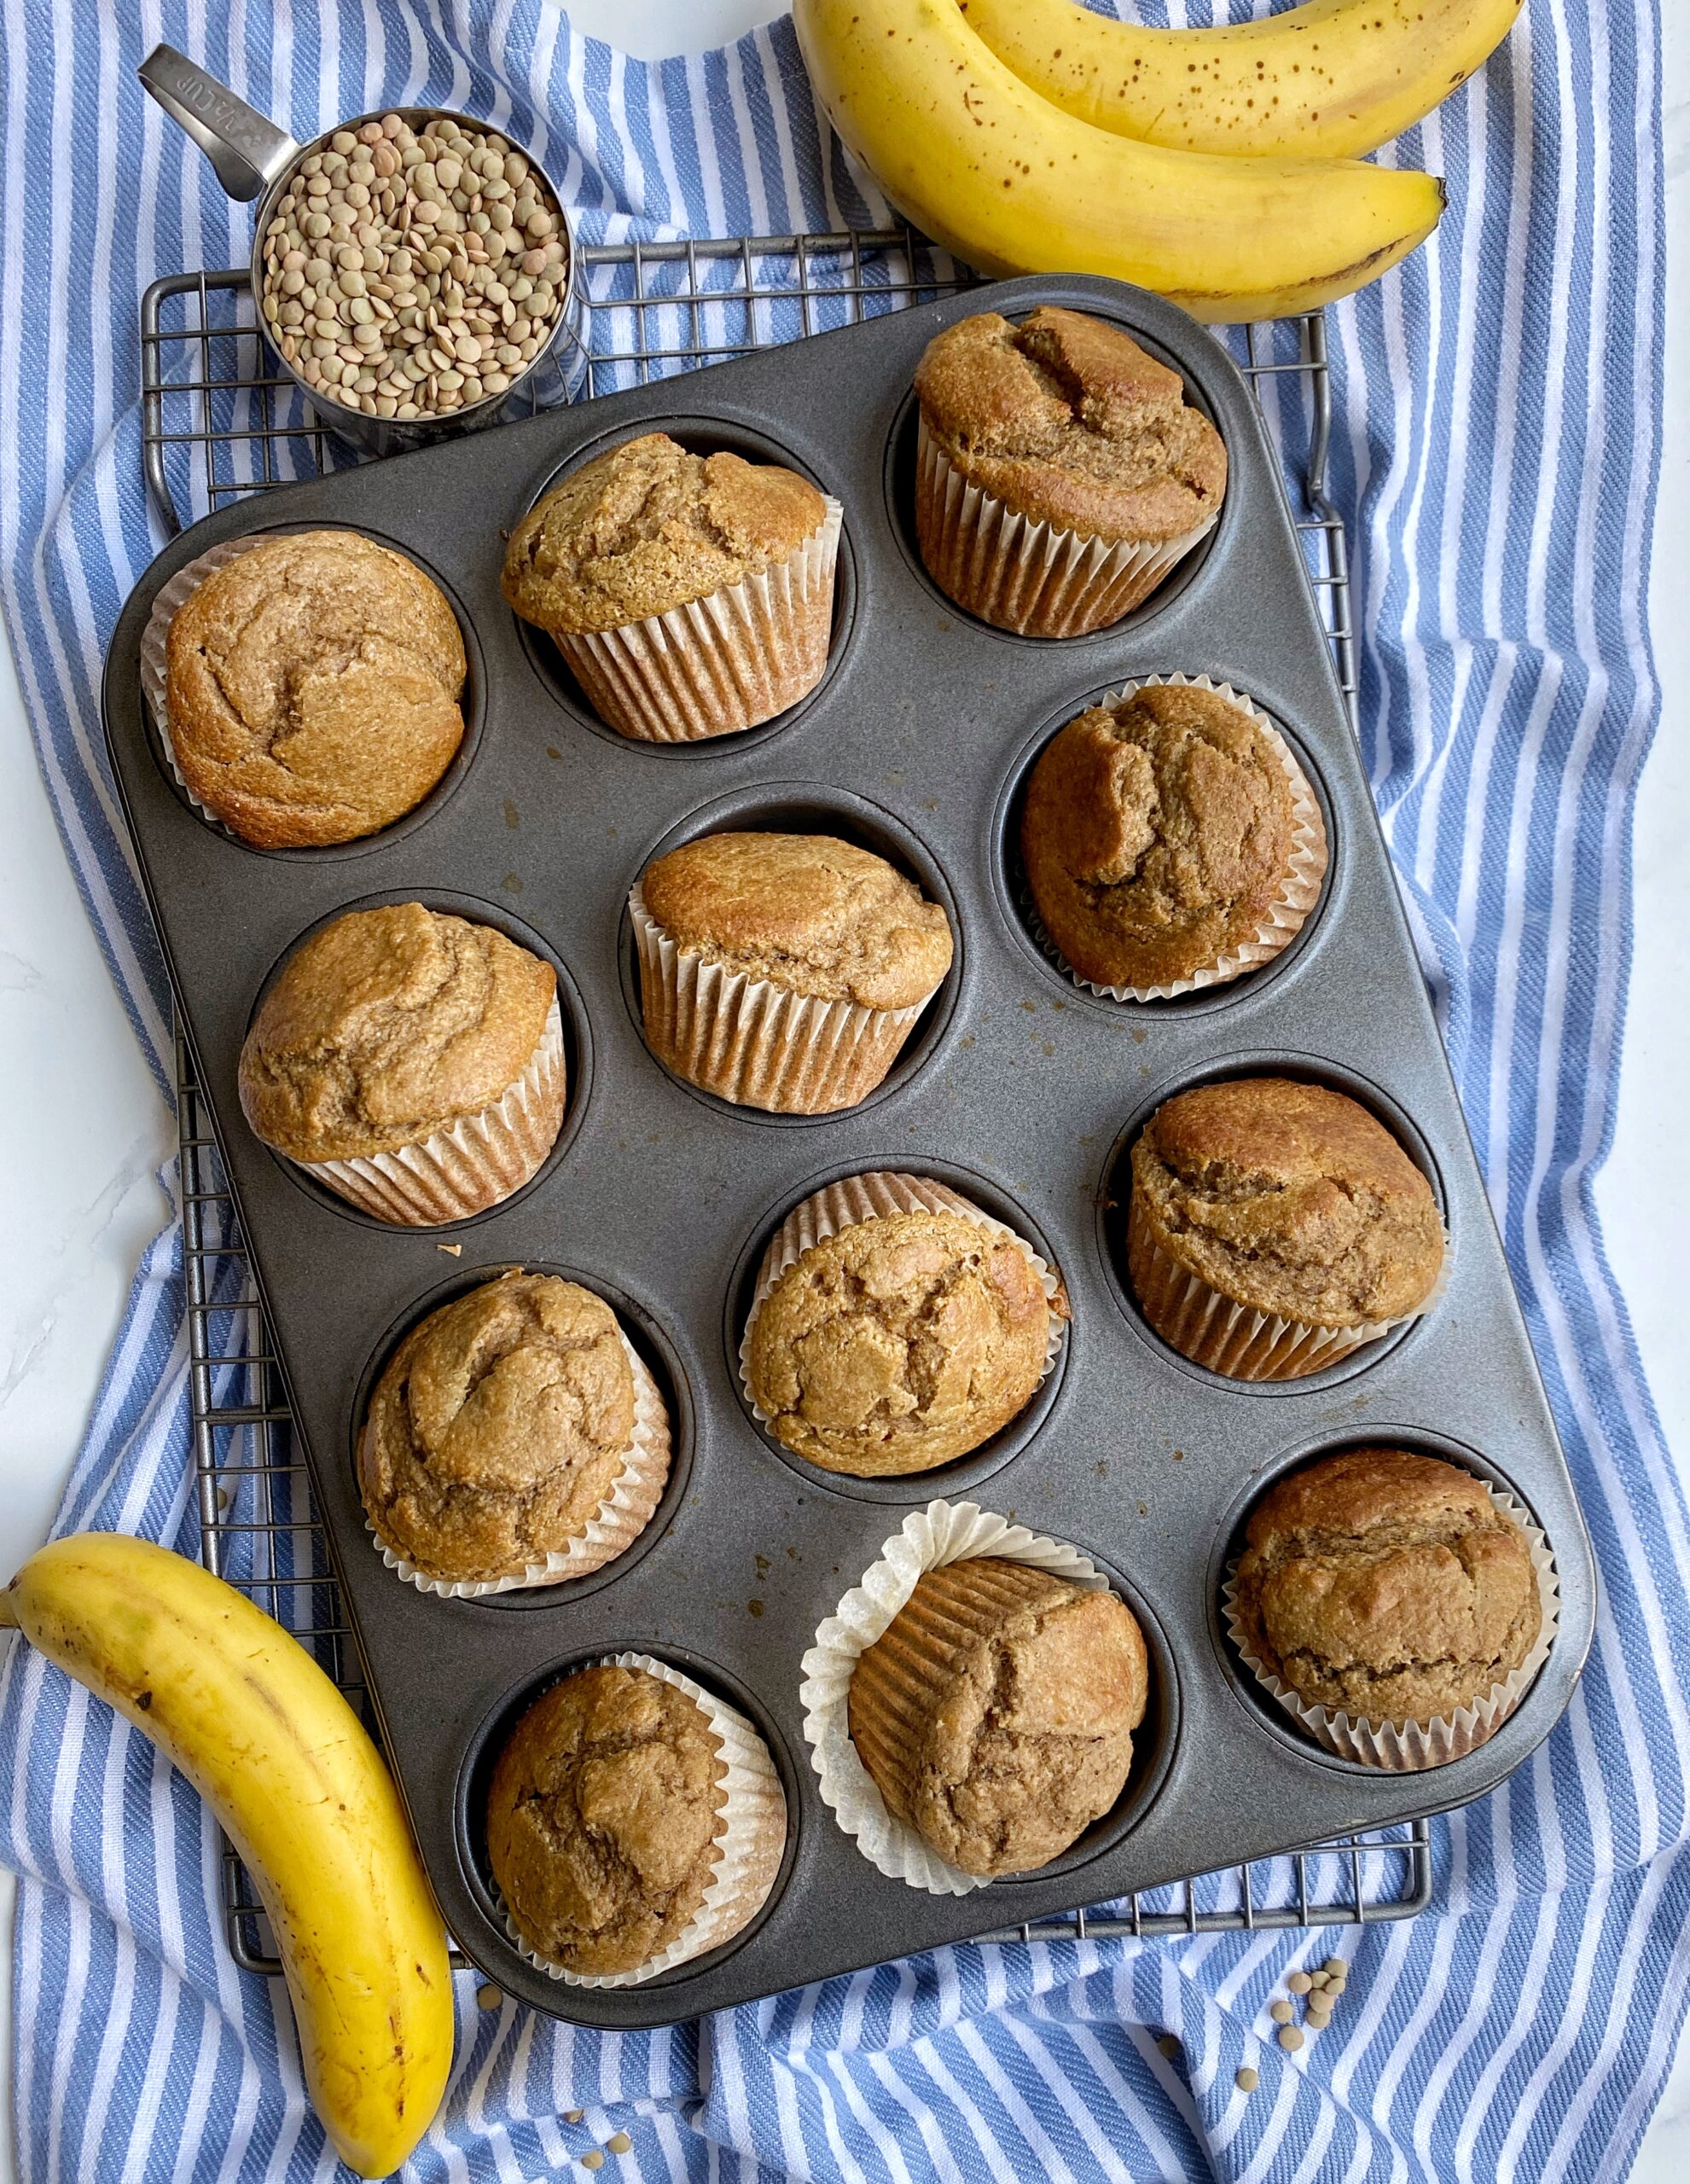 Baked muffins in a cupcake tin filled with paper muffin liners. Muffin tin is sitting on a cooling rack on top of a kitchen towel and is surrounded by bananas and a measuring cup full of lentils.